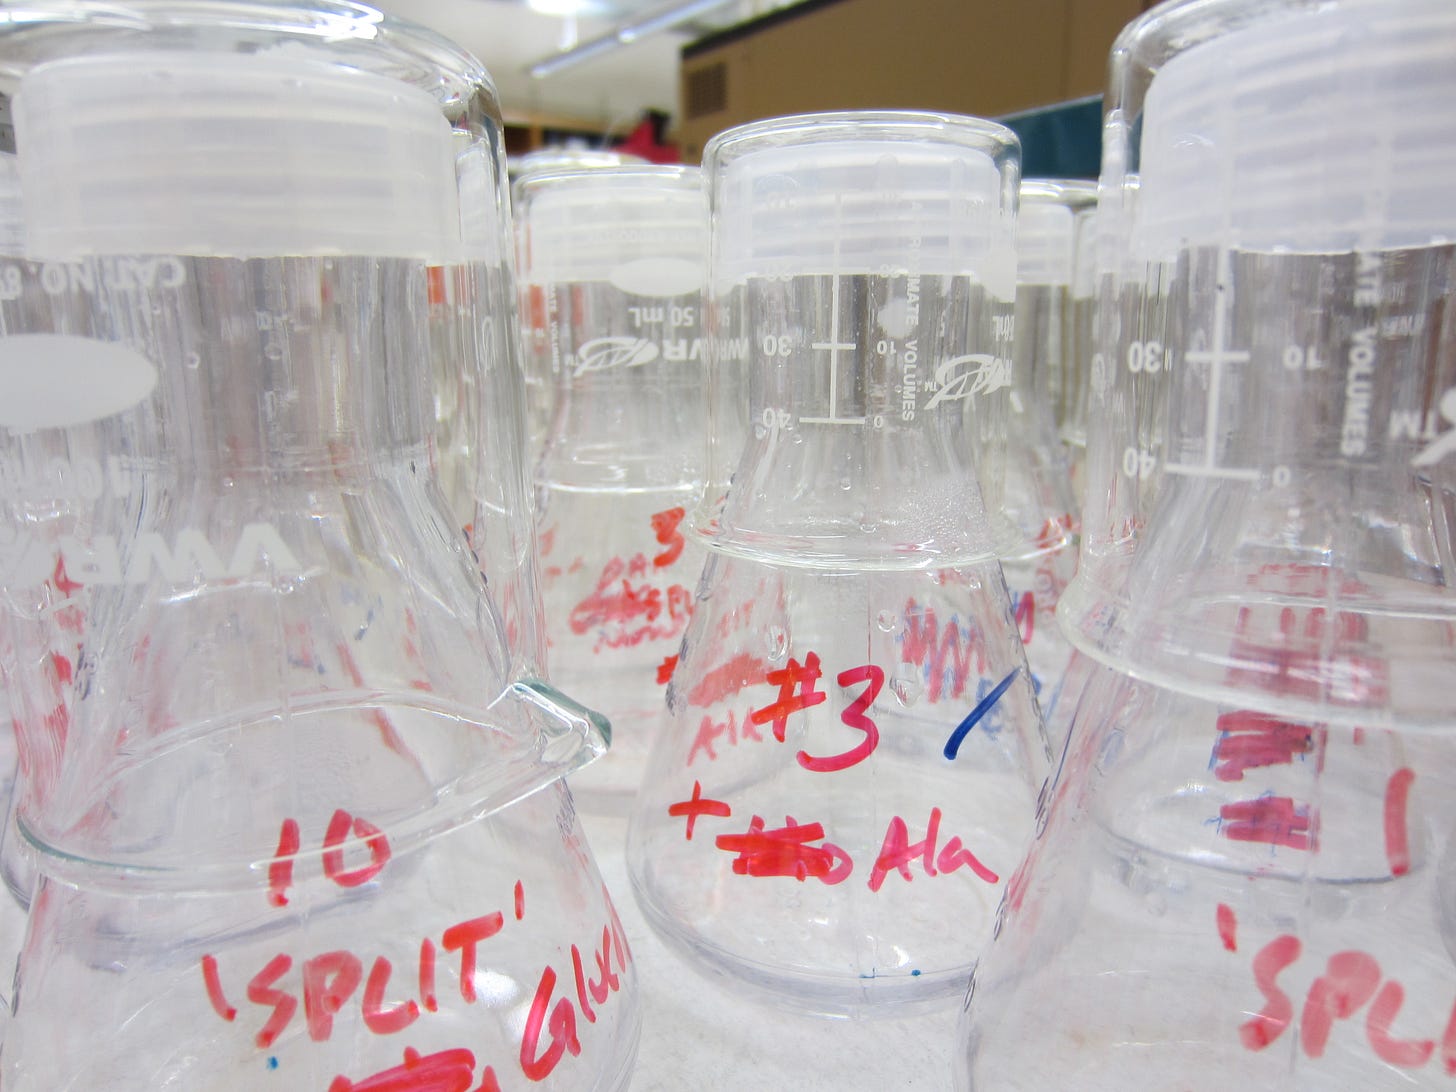 Clear flasks with red writing